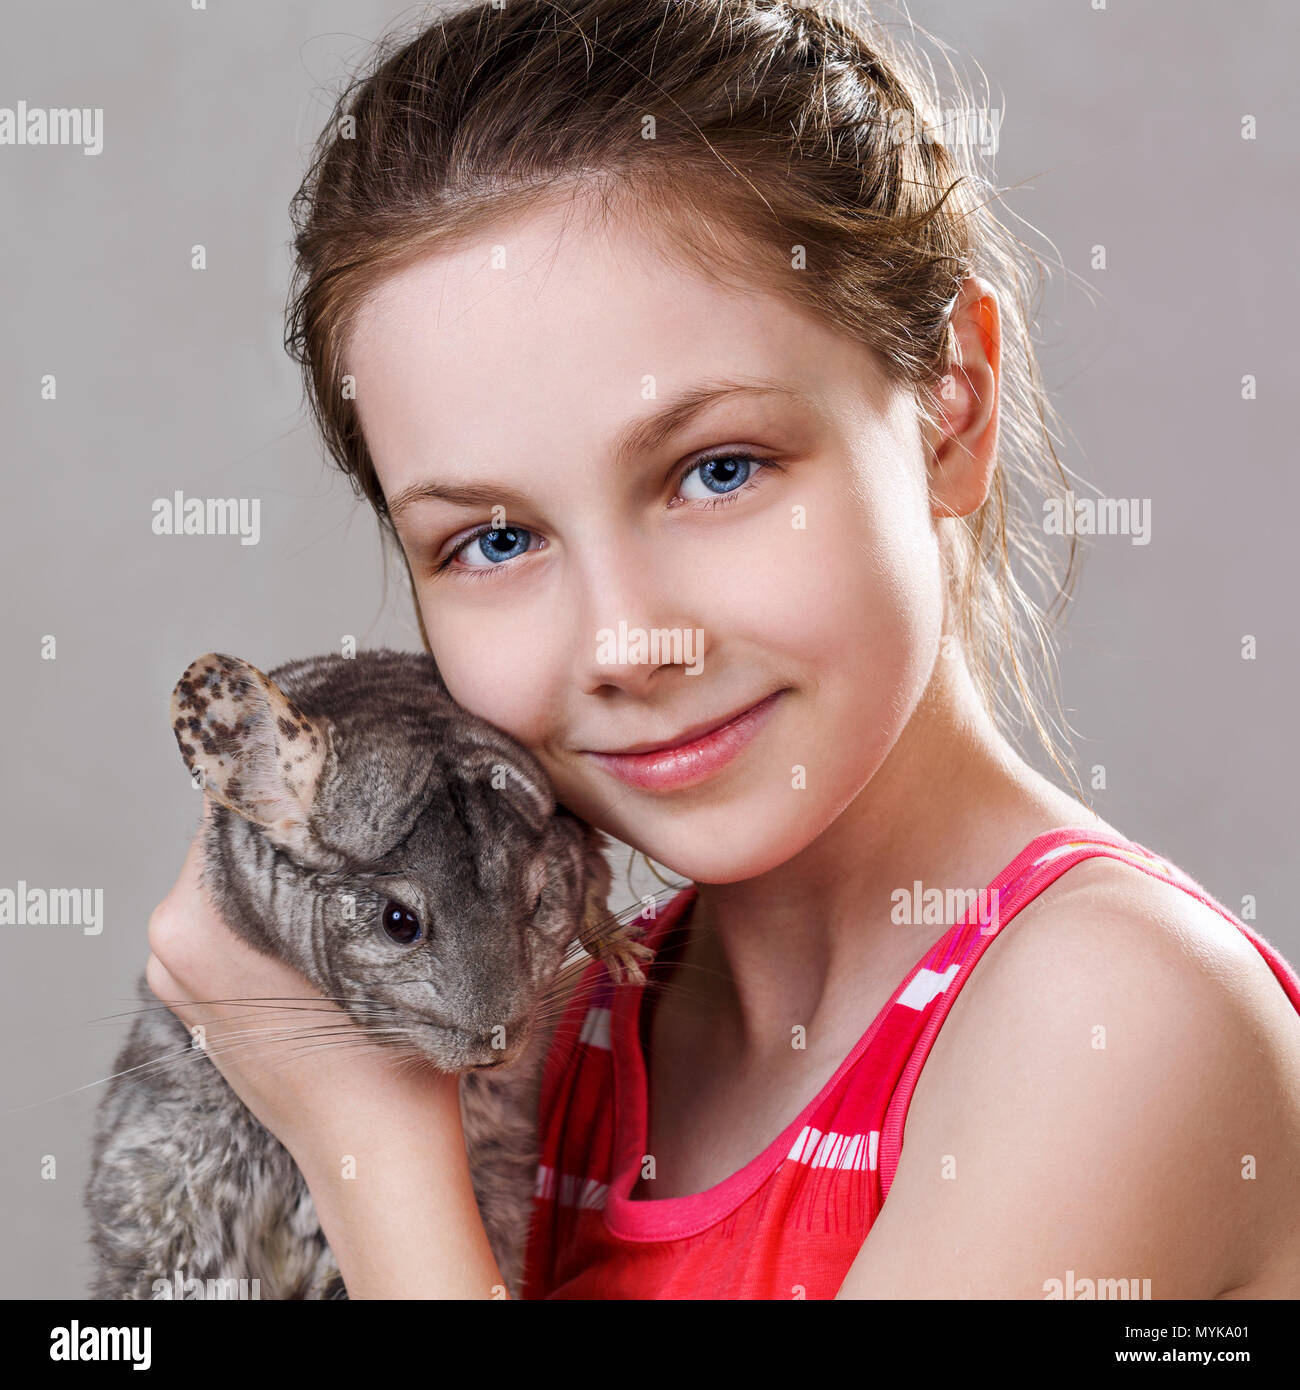 Cute smiling little girl holds funny gray chinchilla. Stock Photo